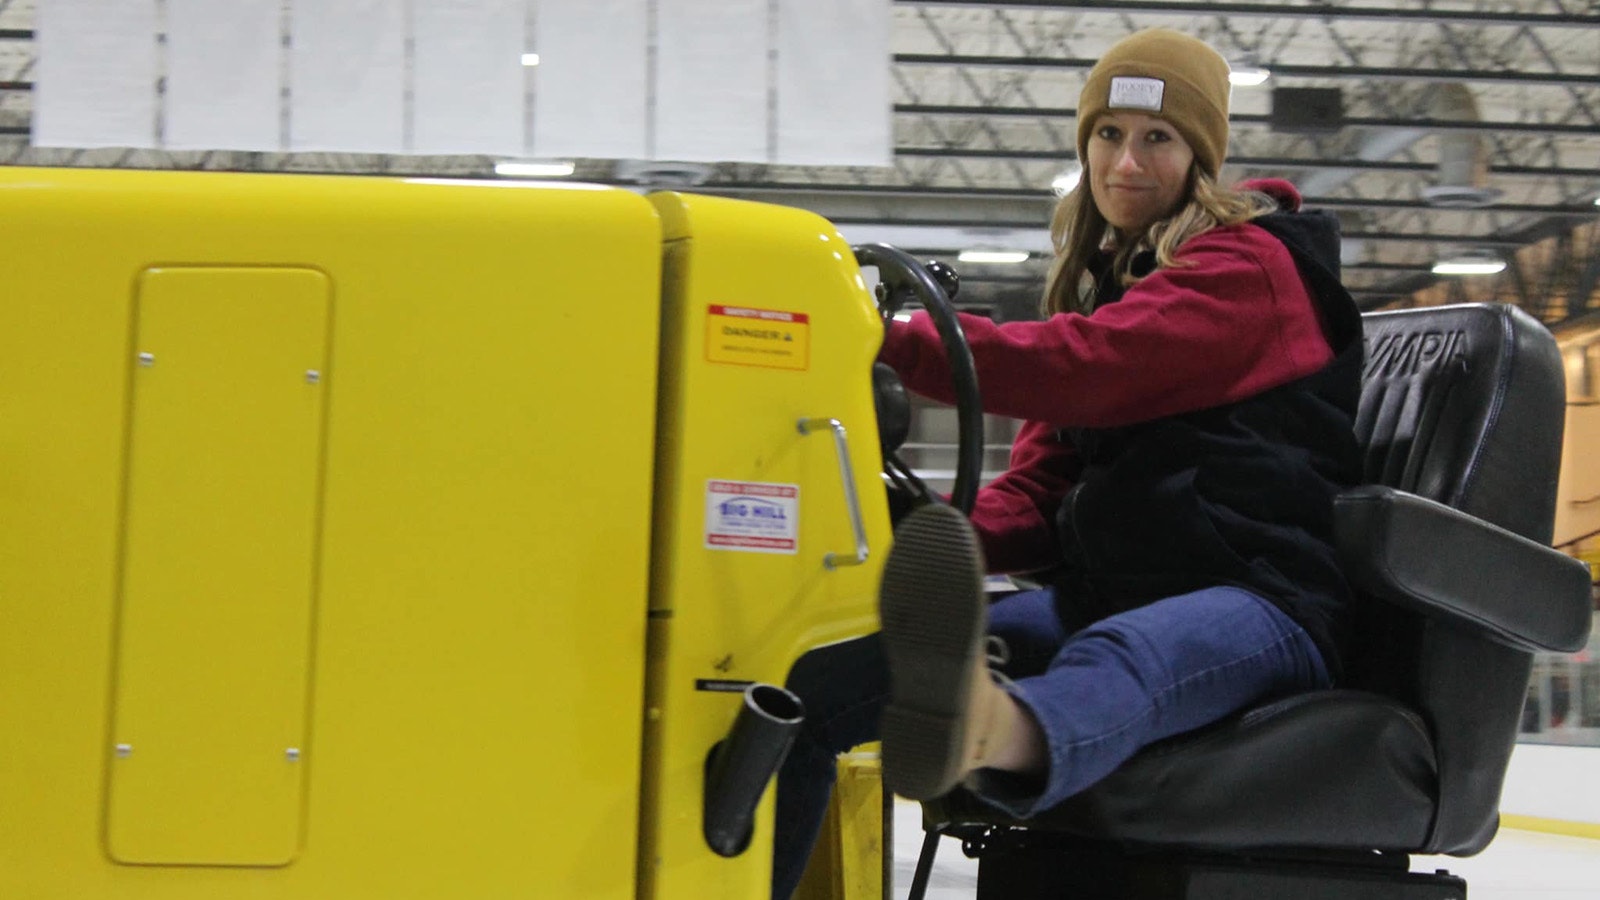 The Zamboni in action at the Cheyenne Ice and Events Center.